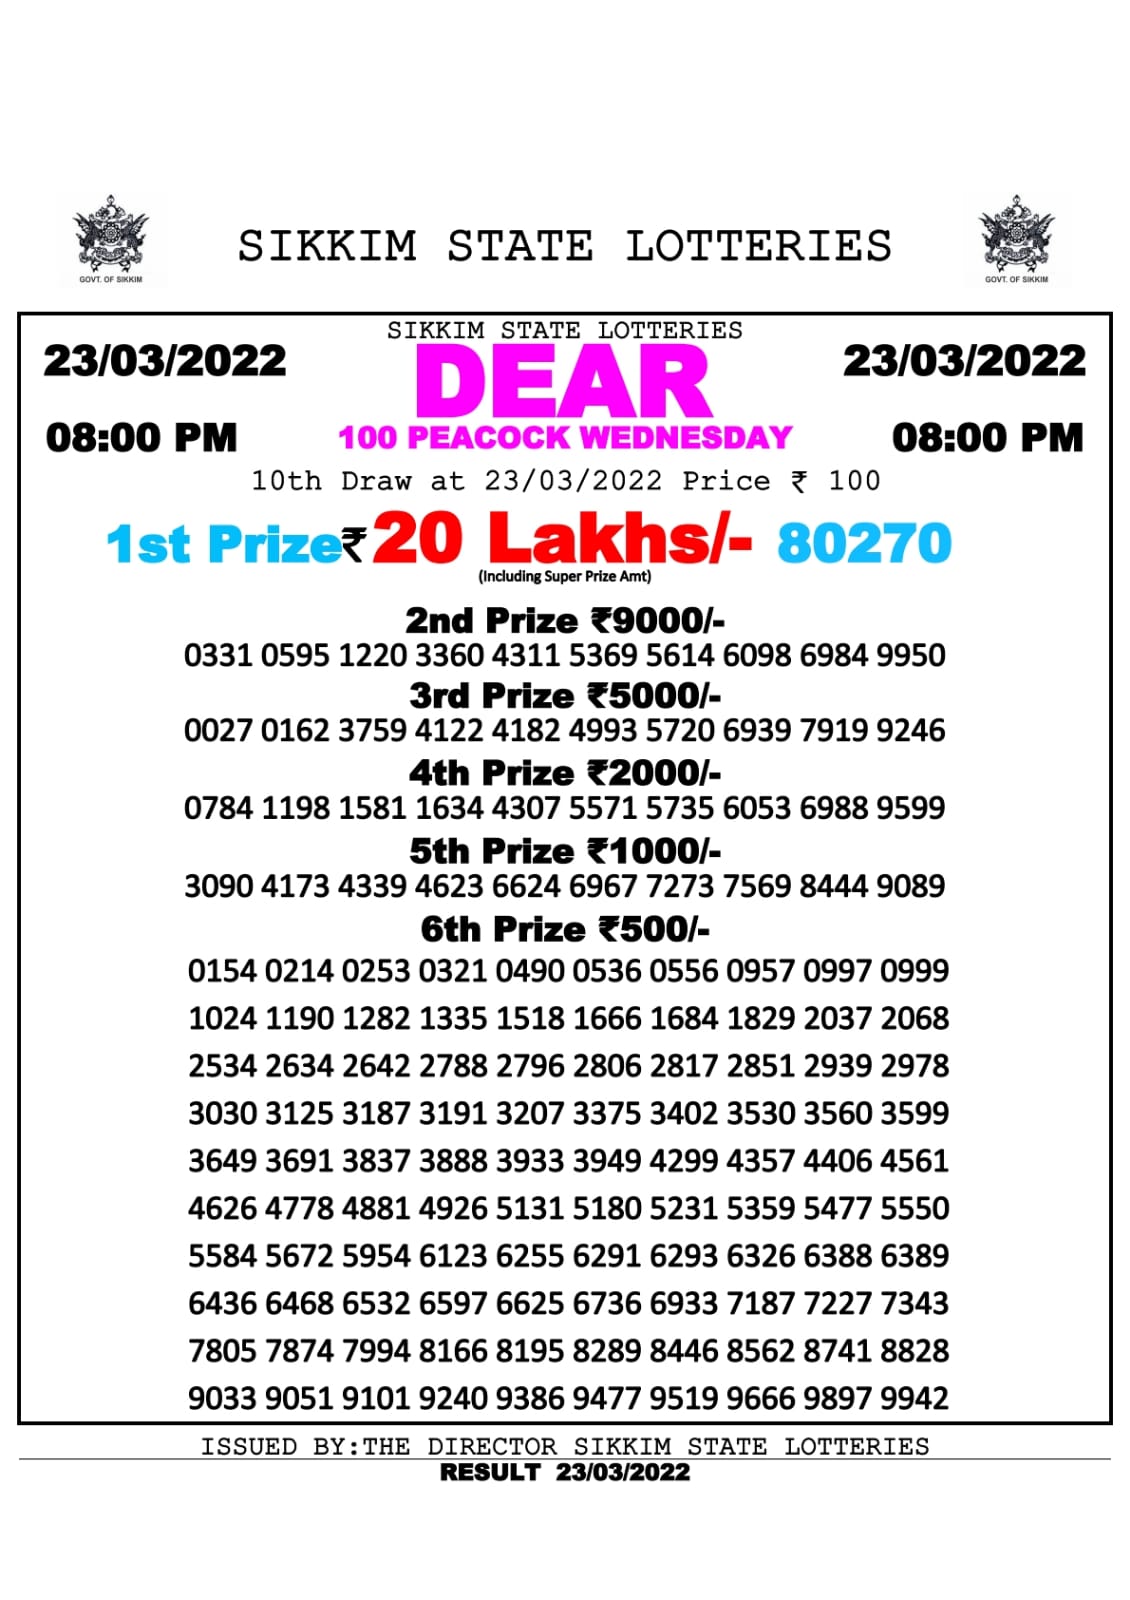 DEAR 100 WEEKLY RESULT 8.00PM 23.03.2022